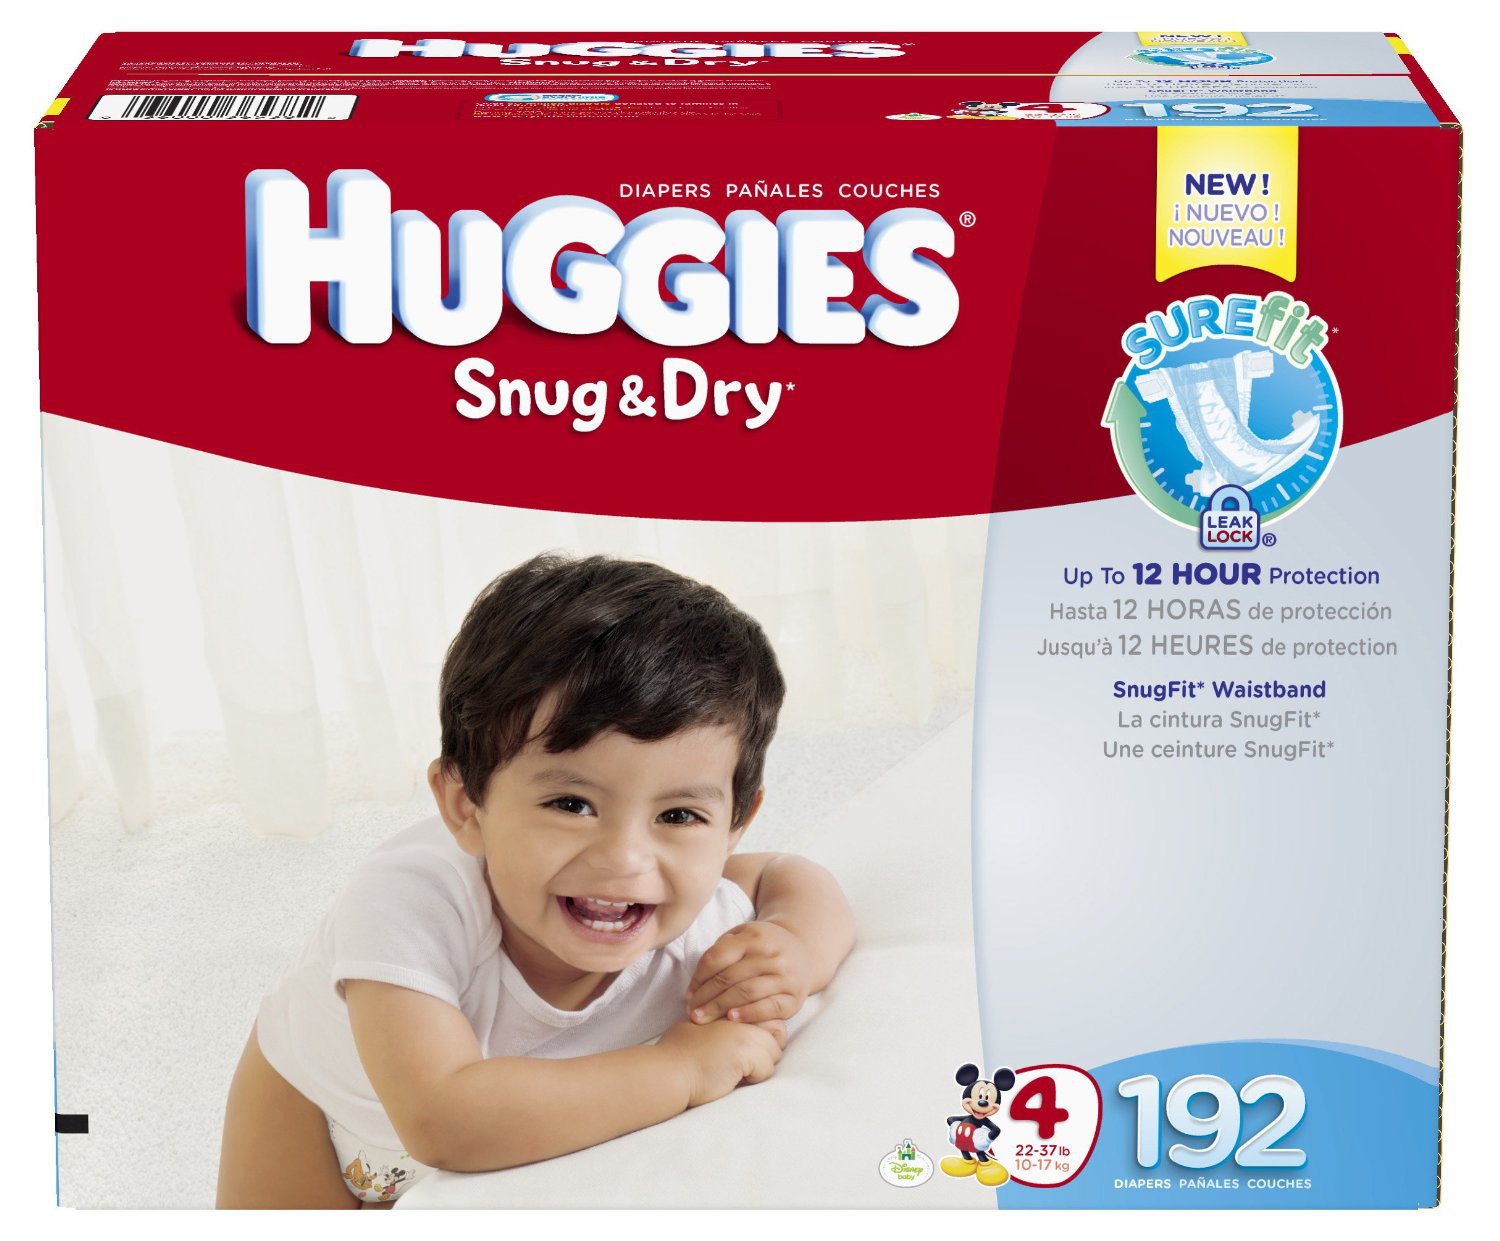 Size 4 fits 22-37 lbs. 192 Count Economy... HUGGIES Snug & Dry Baby Diapers 